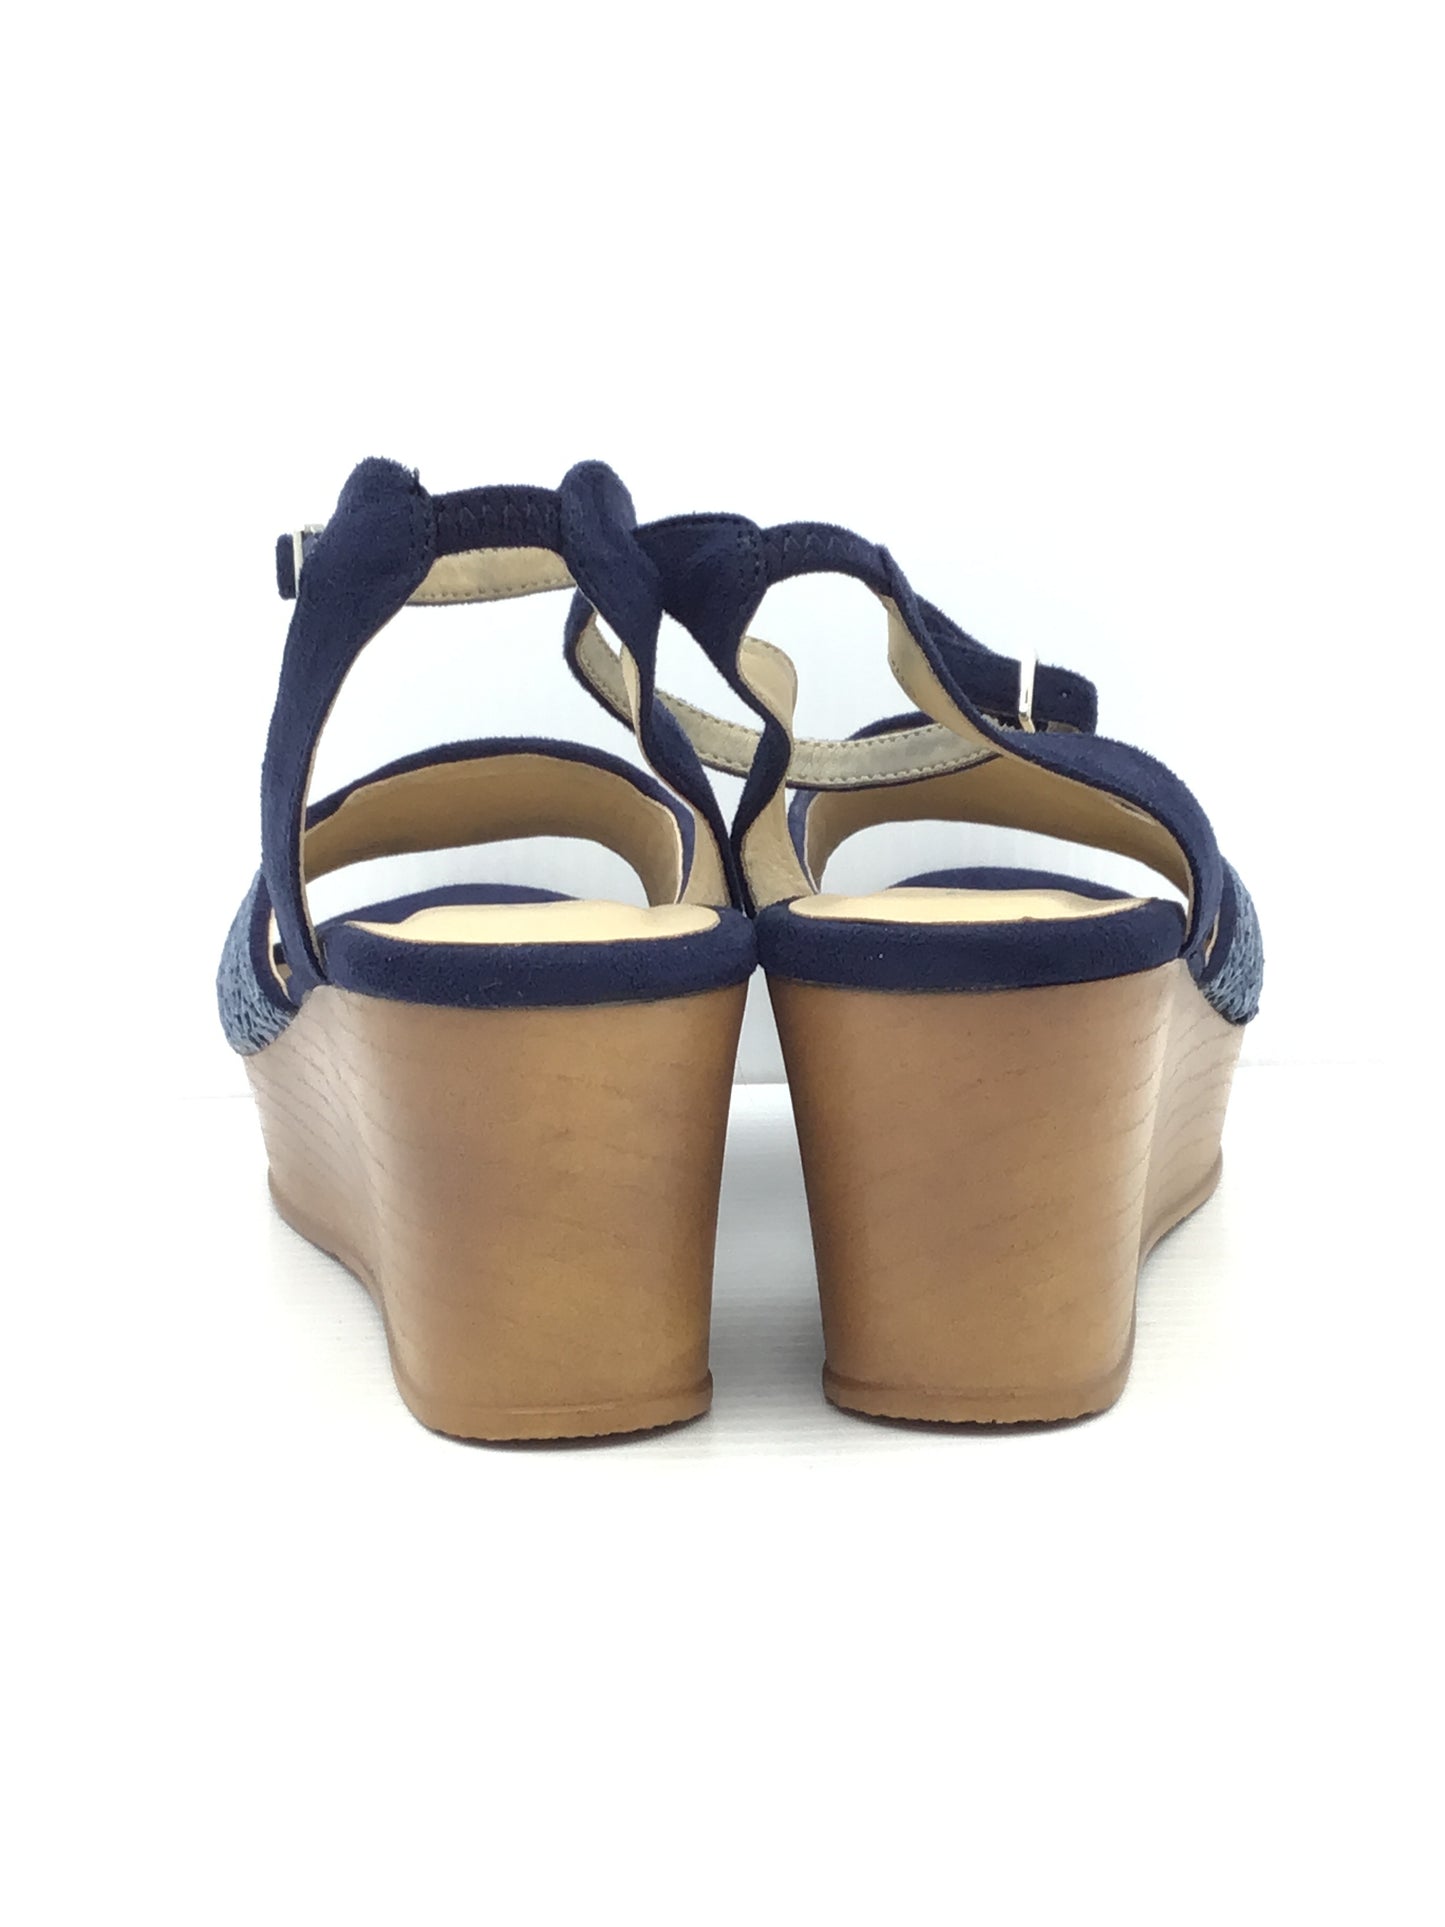 Sandals Heels Wedge By Laundry  Size: 8